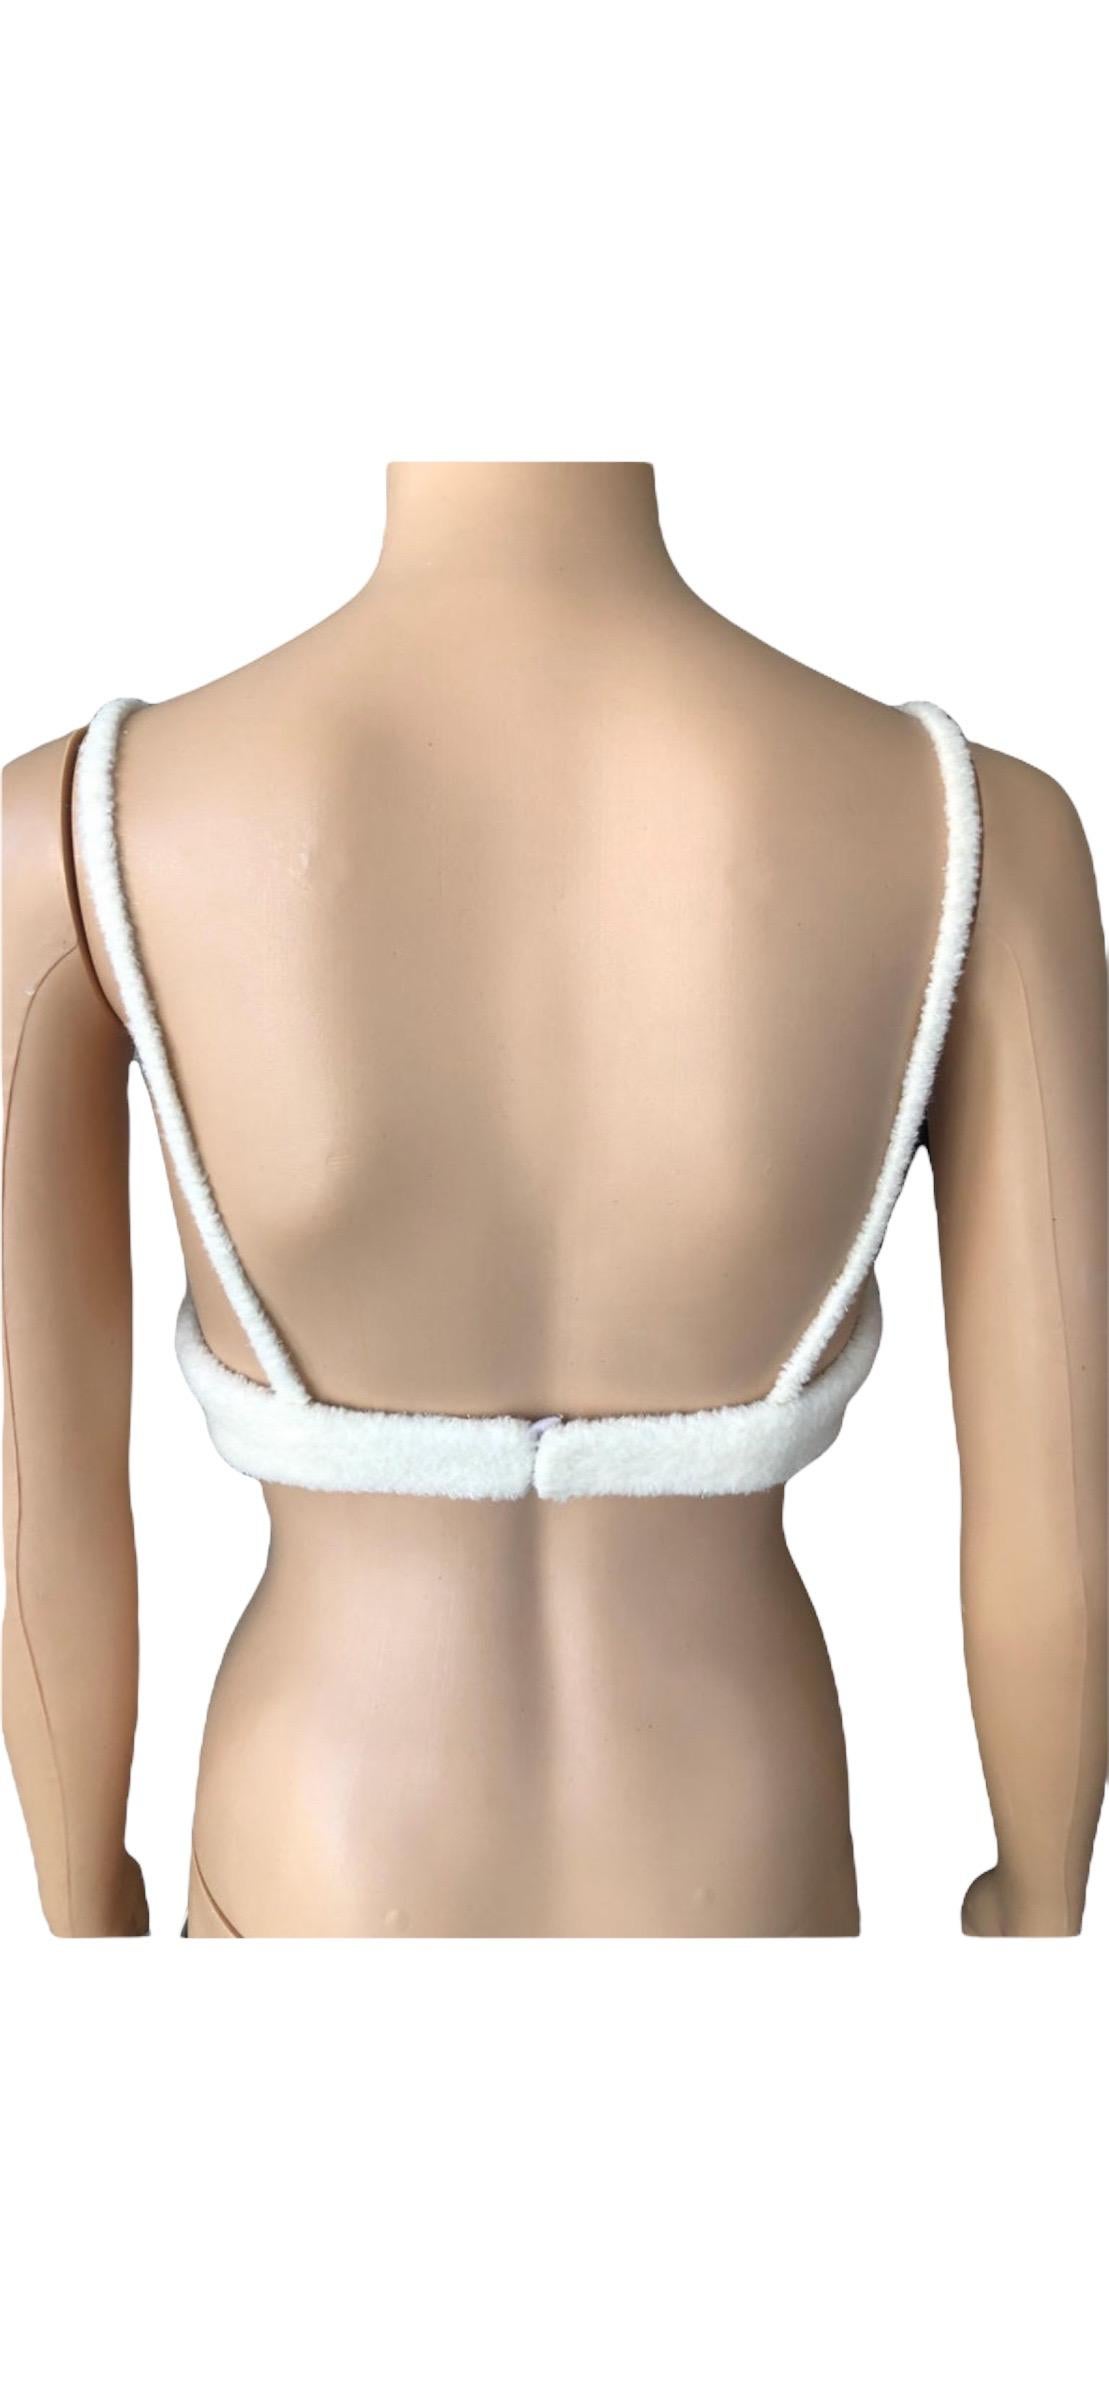 Azzedine Alaia F/W 1992 Runway Iconic Vintage Chenille Padded White Bra Bralette For Sale 9